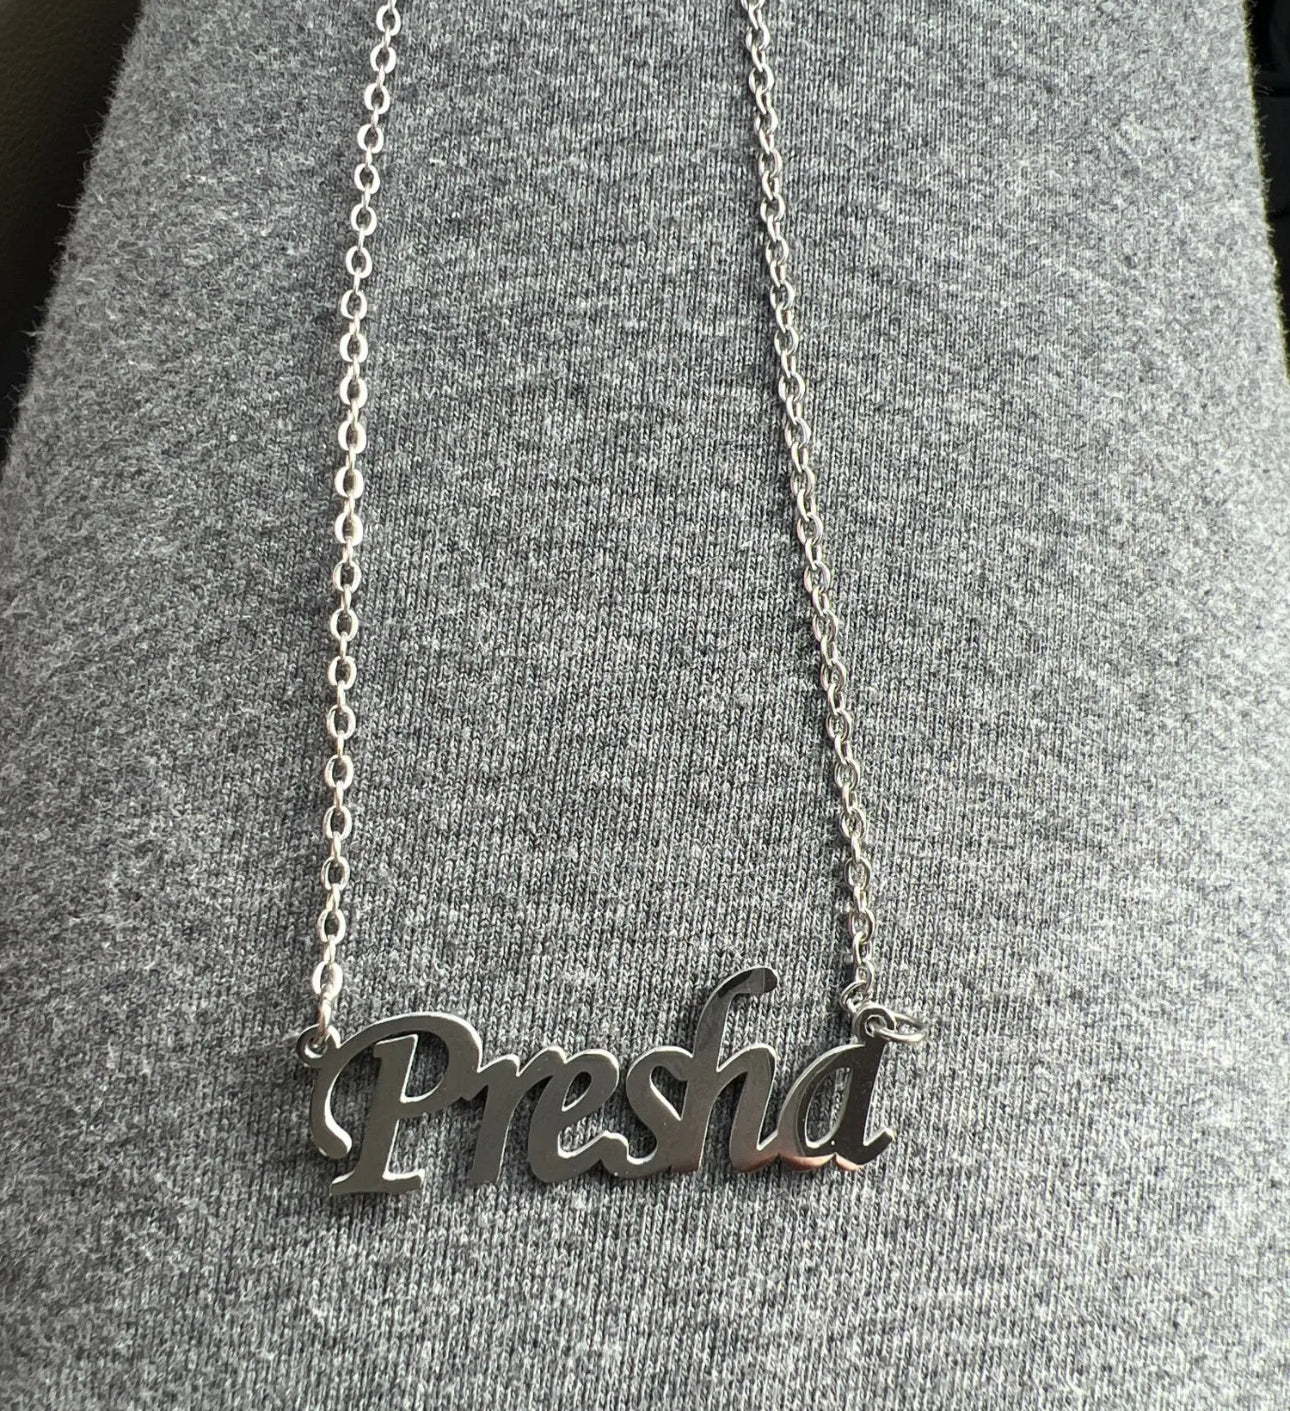 Personalized stainless steel name necklace